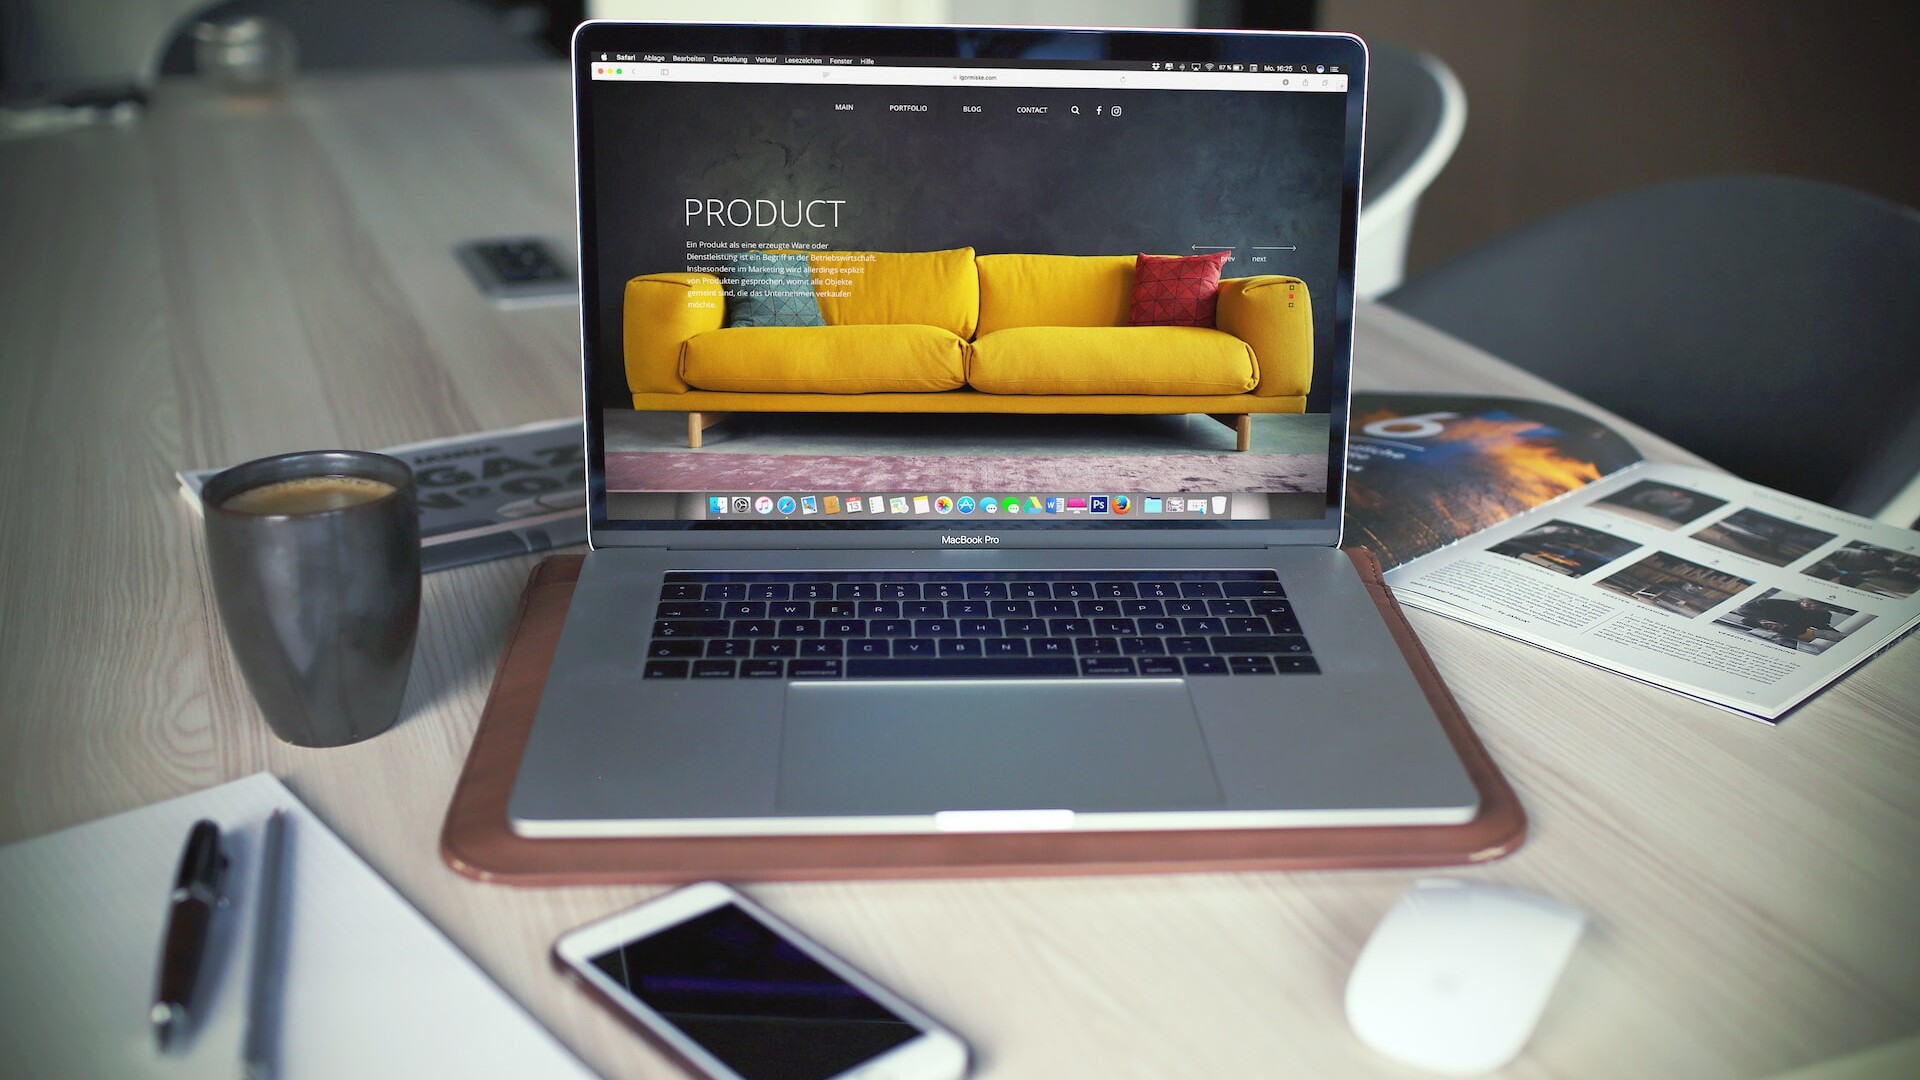 Product Design on the computer screen showcasing couch products.